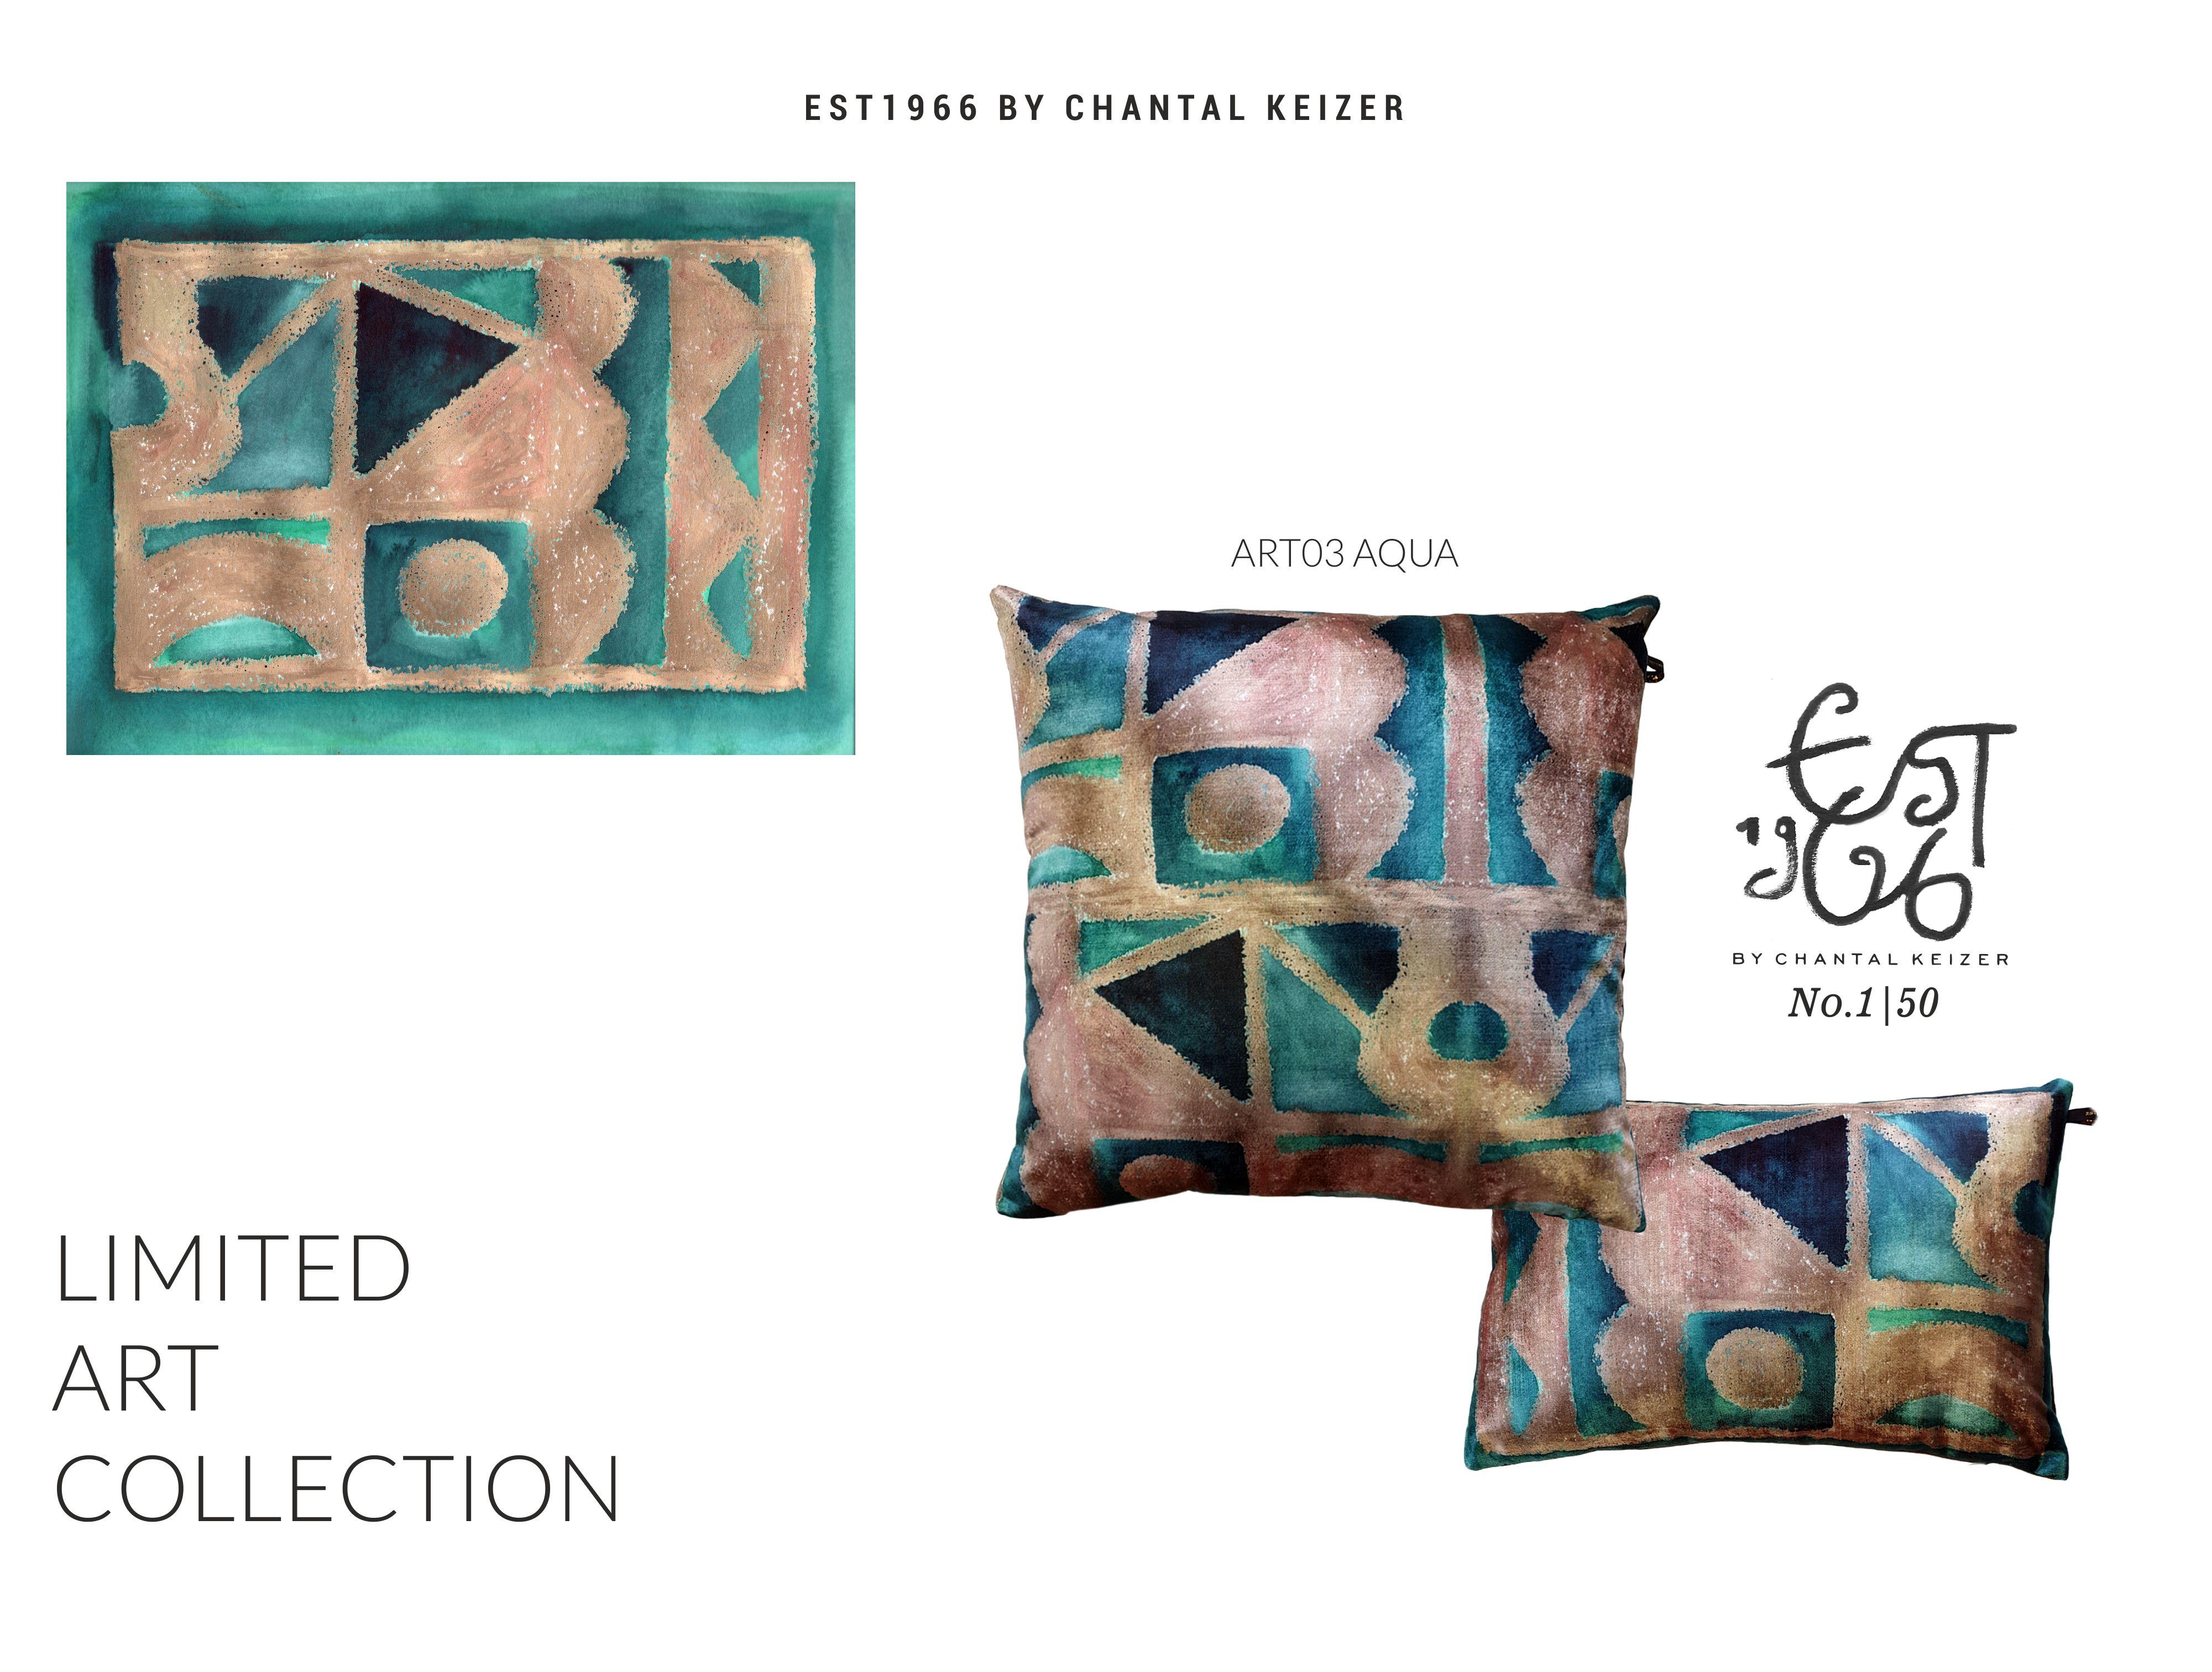 Chantal Keizer painted a number of Art works and transferred them to fabric in a limited collection. 

Of each work a maximum of 50 cushions are available worldwide.

This design is printed on a very luxurious woven velvet with a beautiful